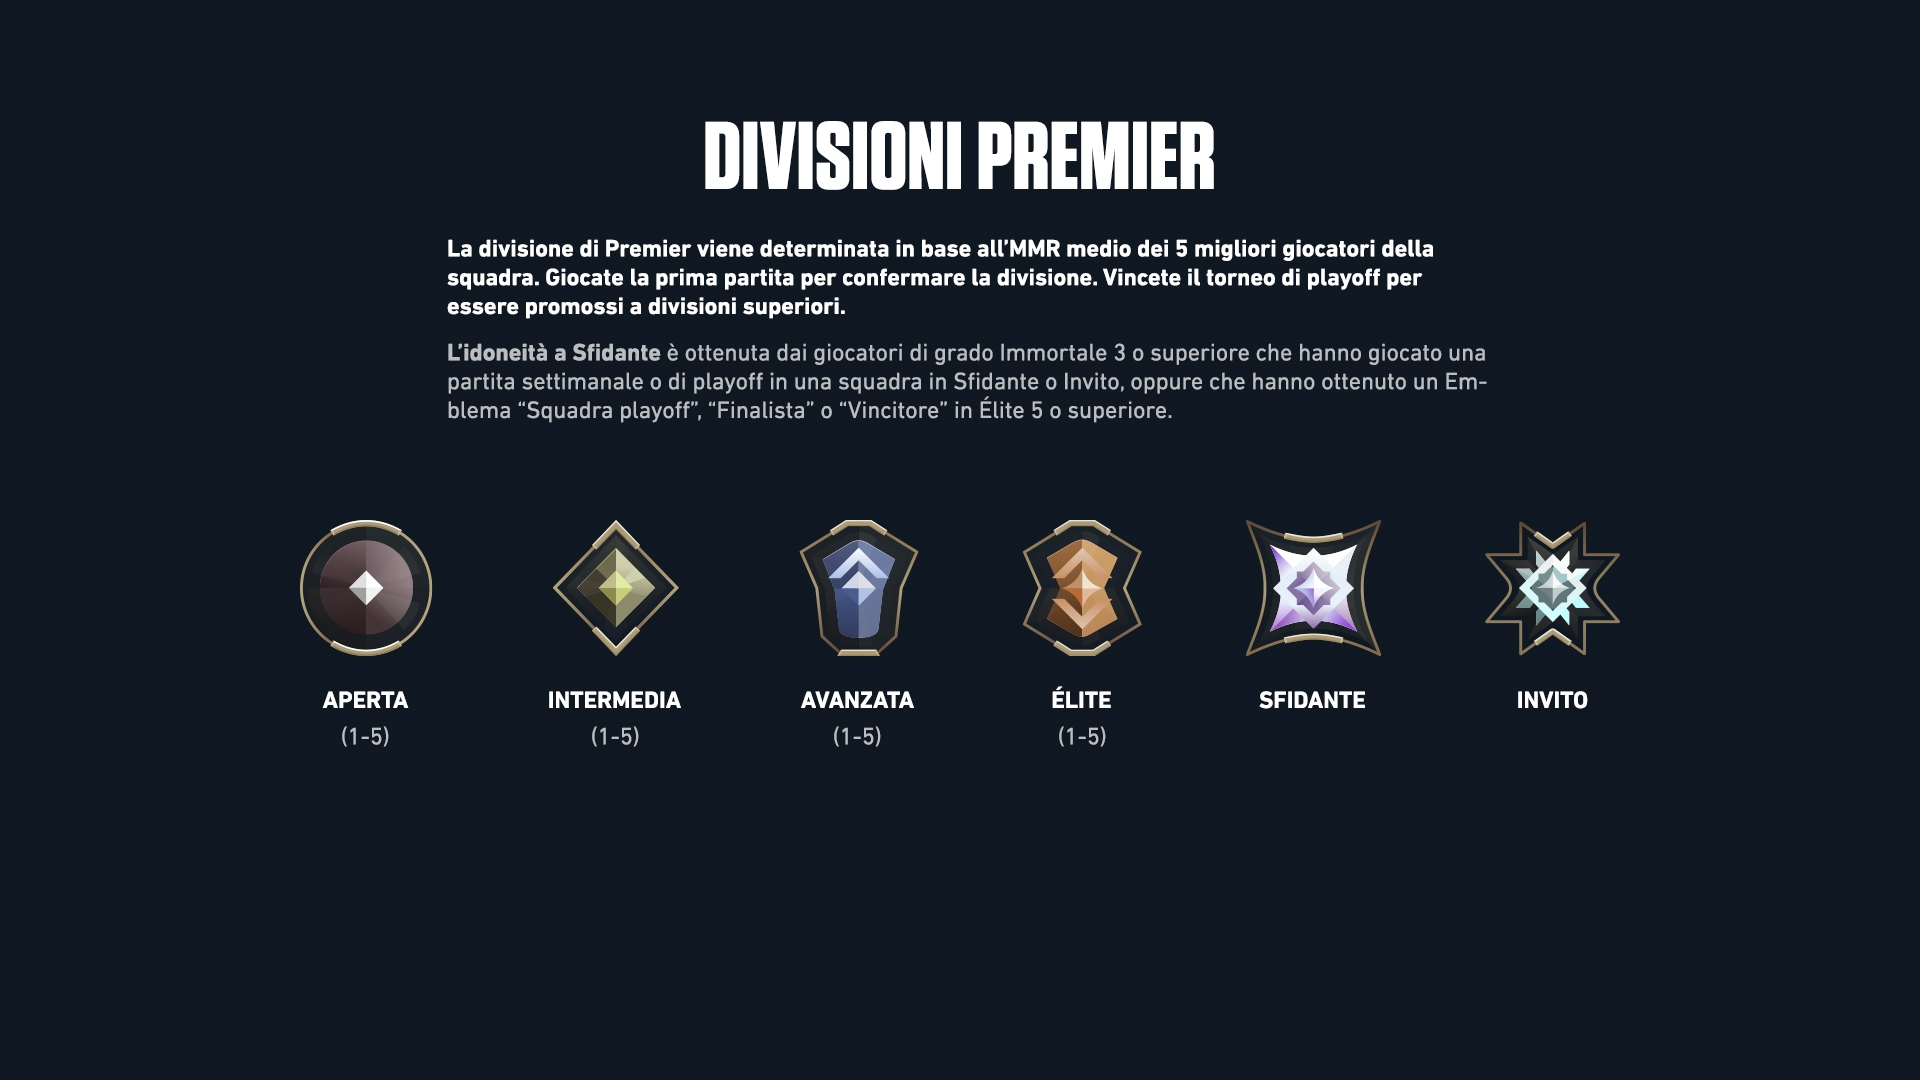 DivisionOverview_IT.jpg